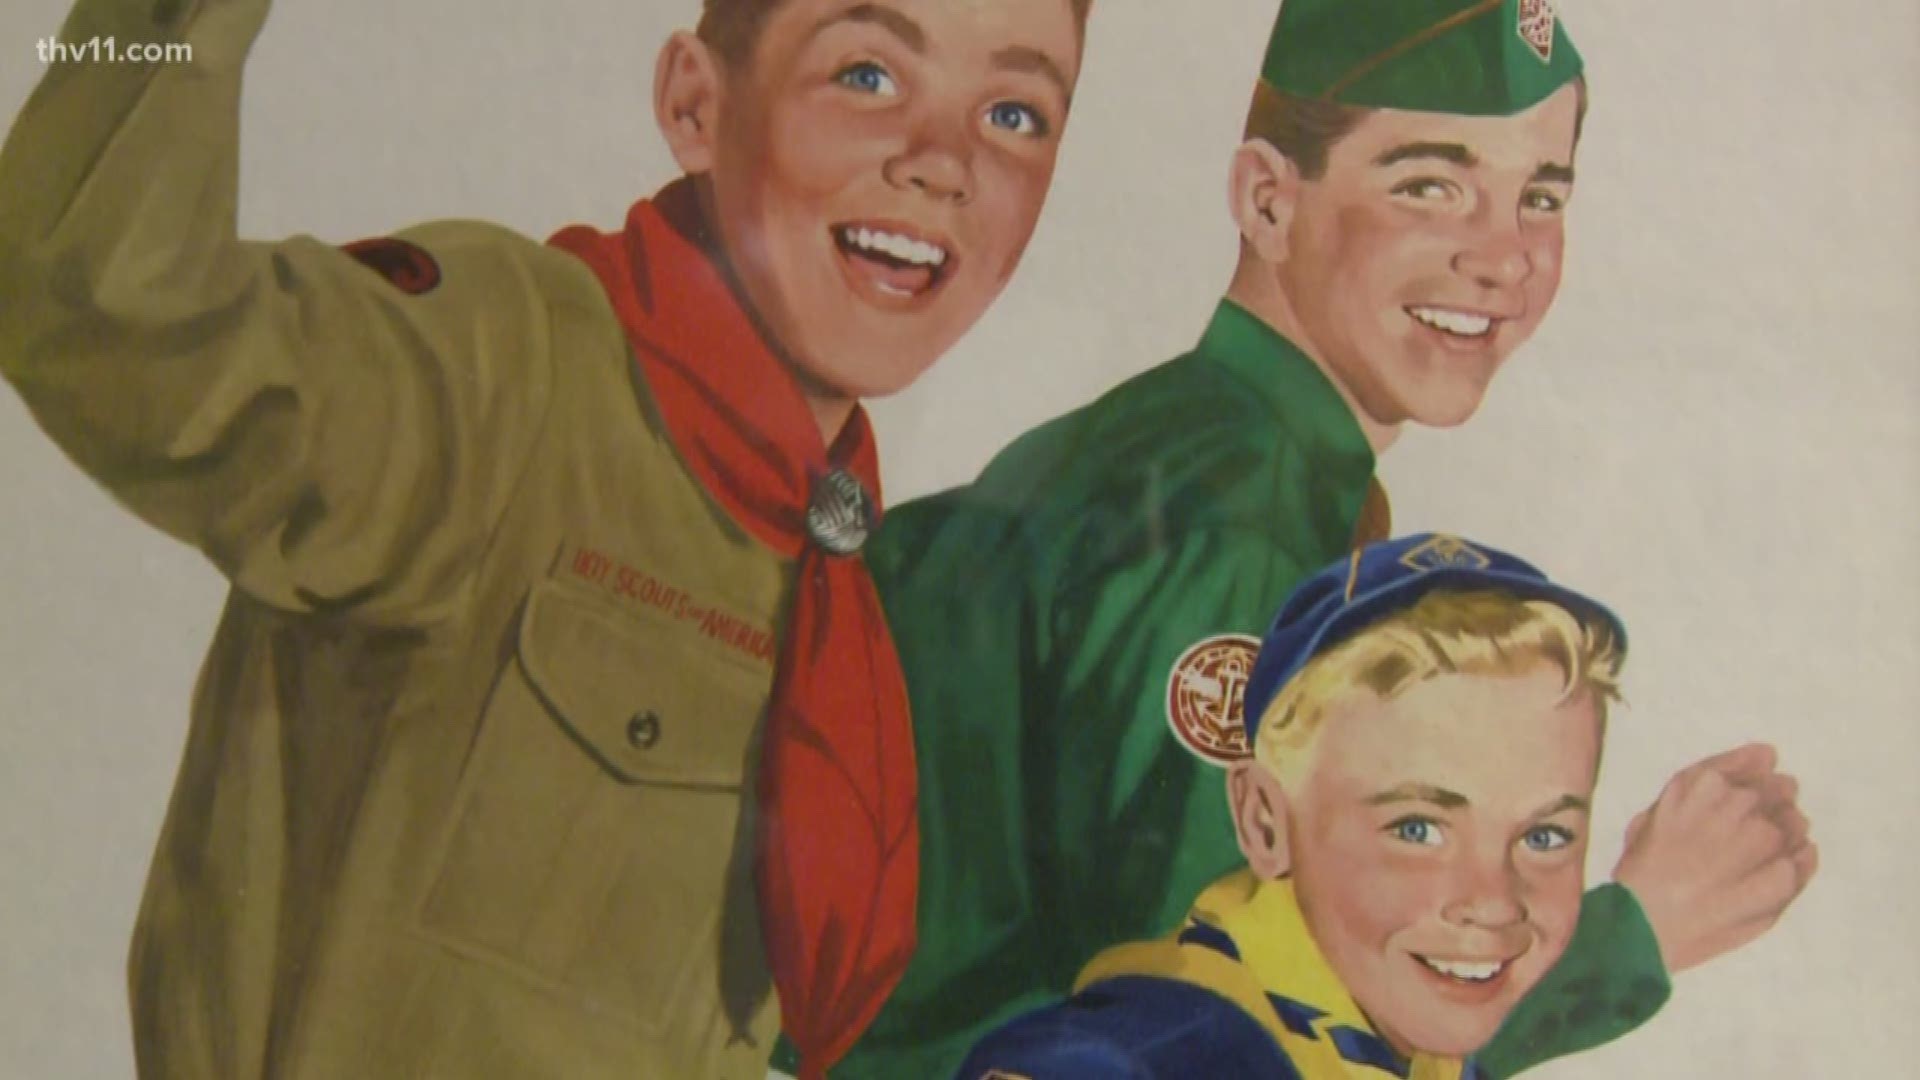 Girls can now learn the useful skills that Boy Scouts have to offer.